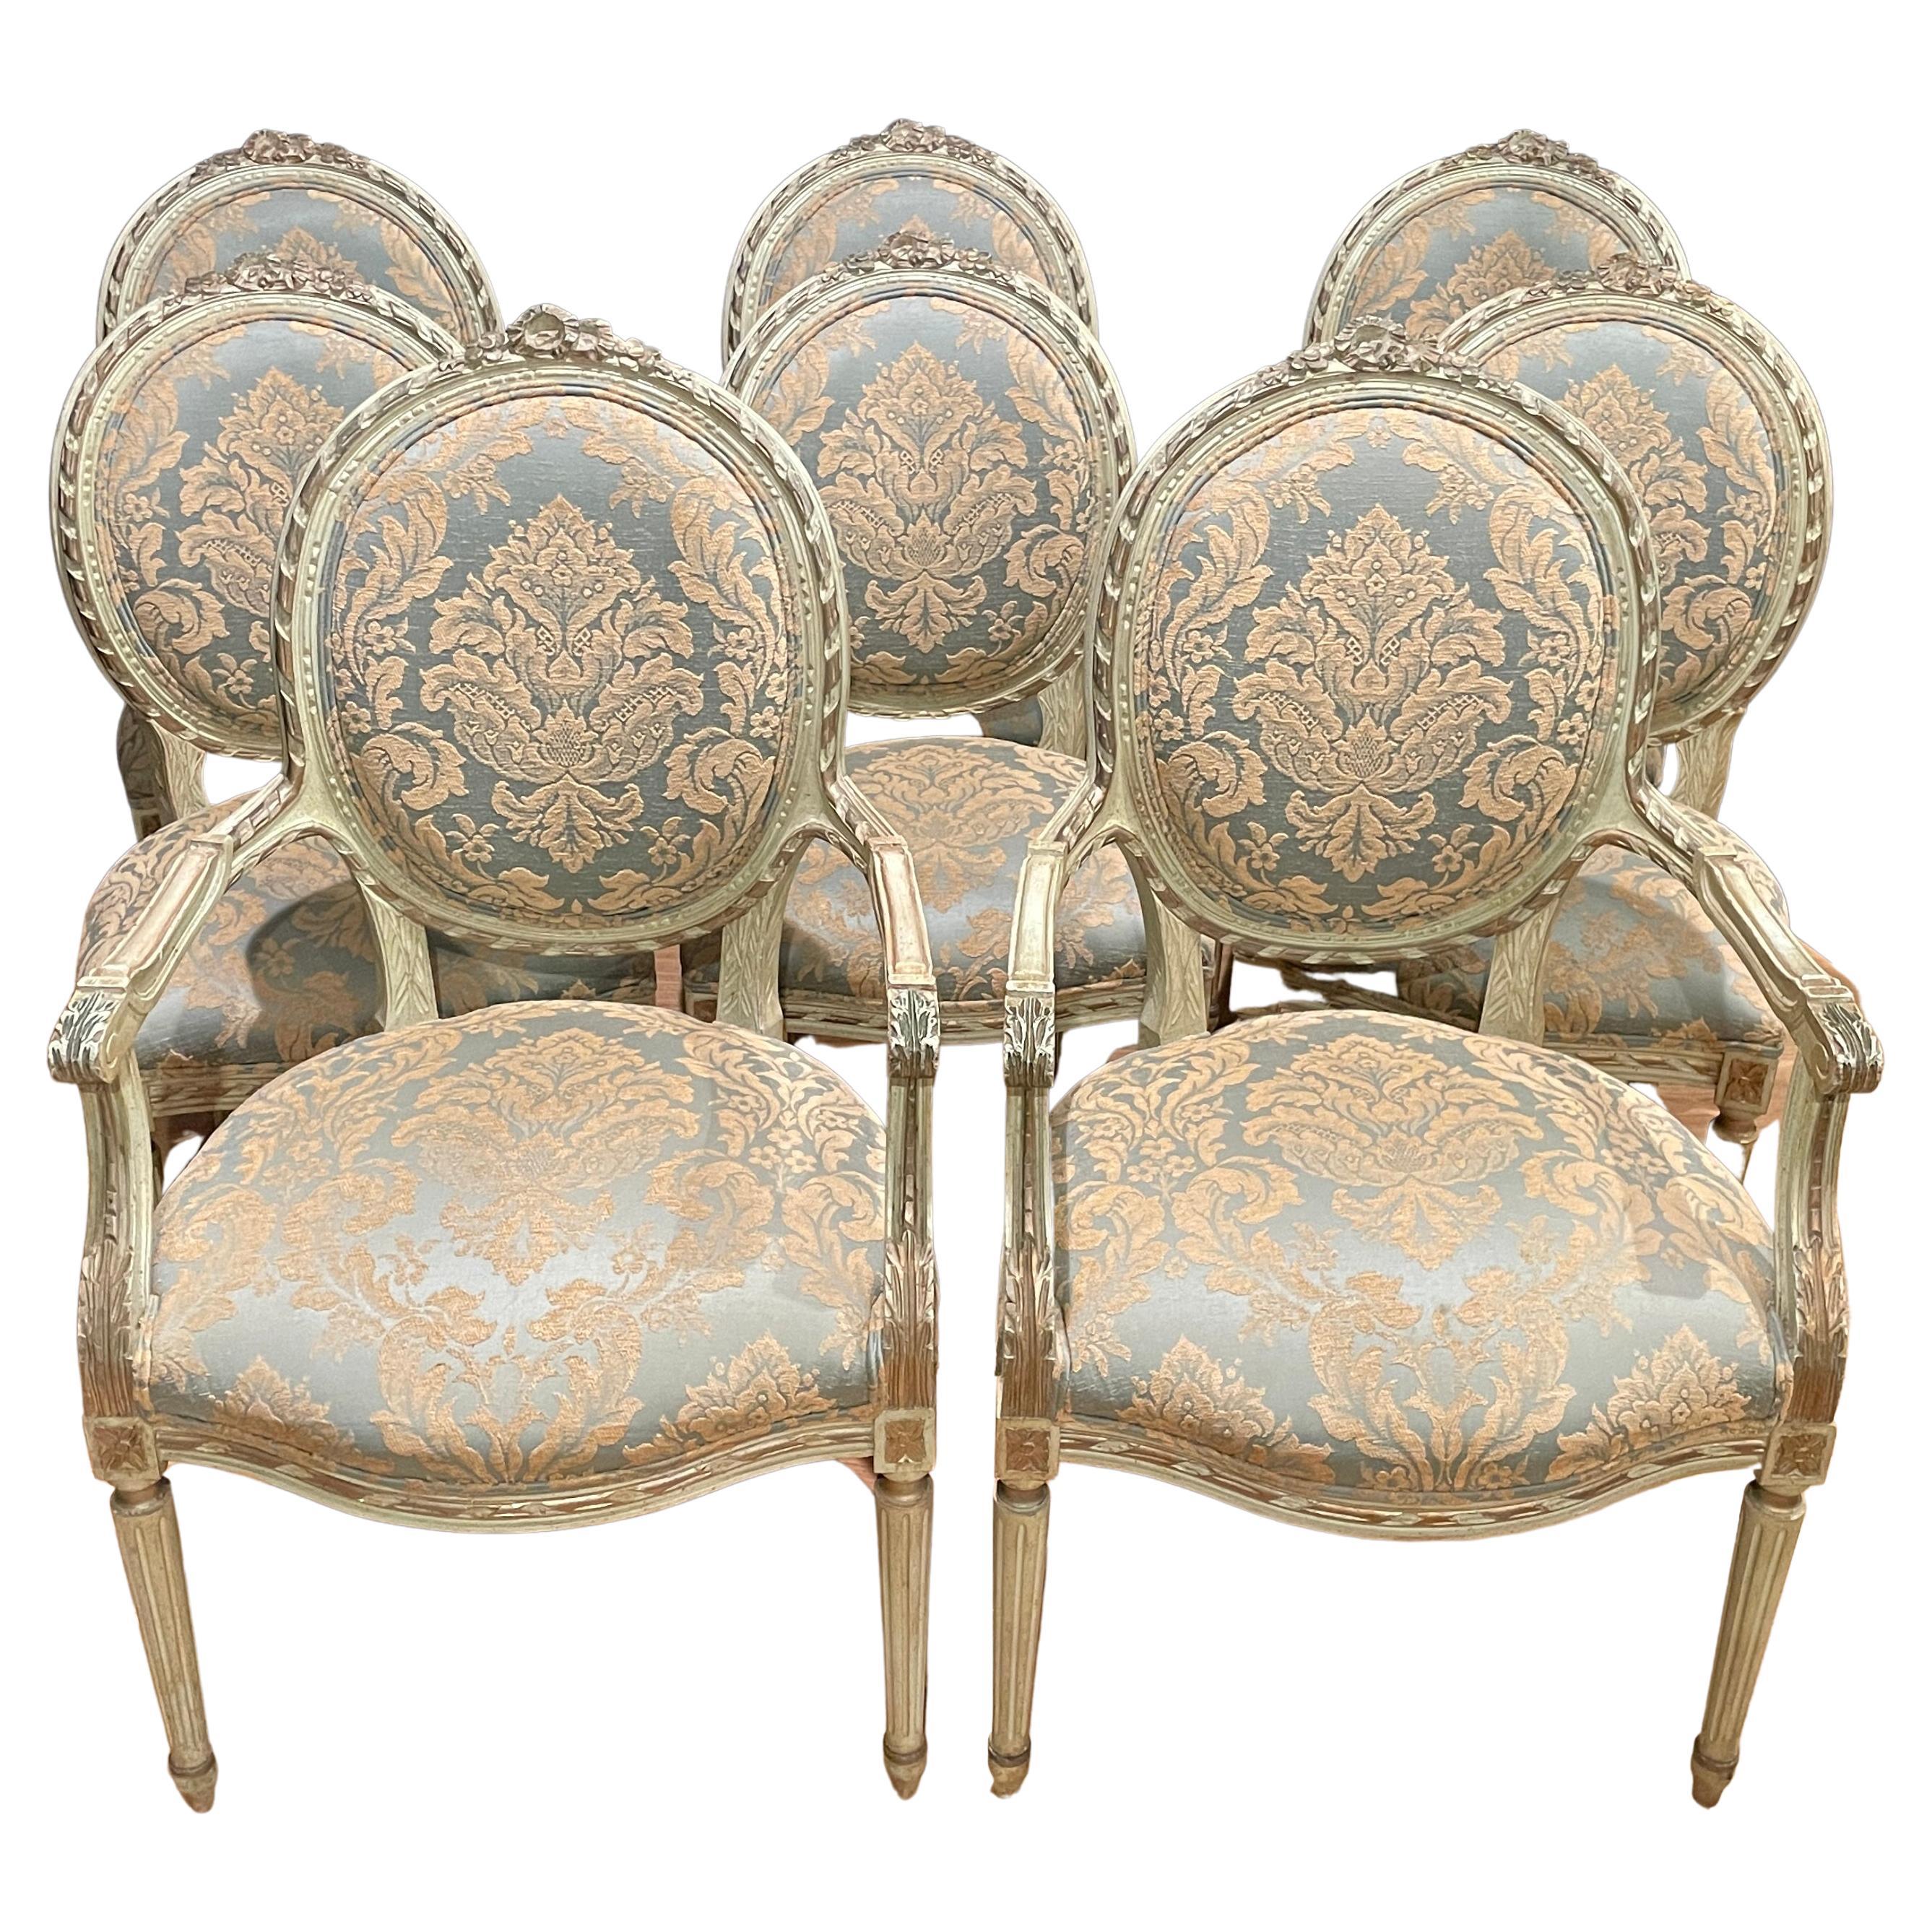 Set of 8 Louis XVI Dining Chairs